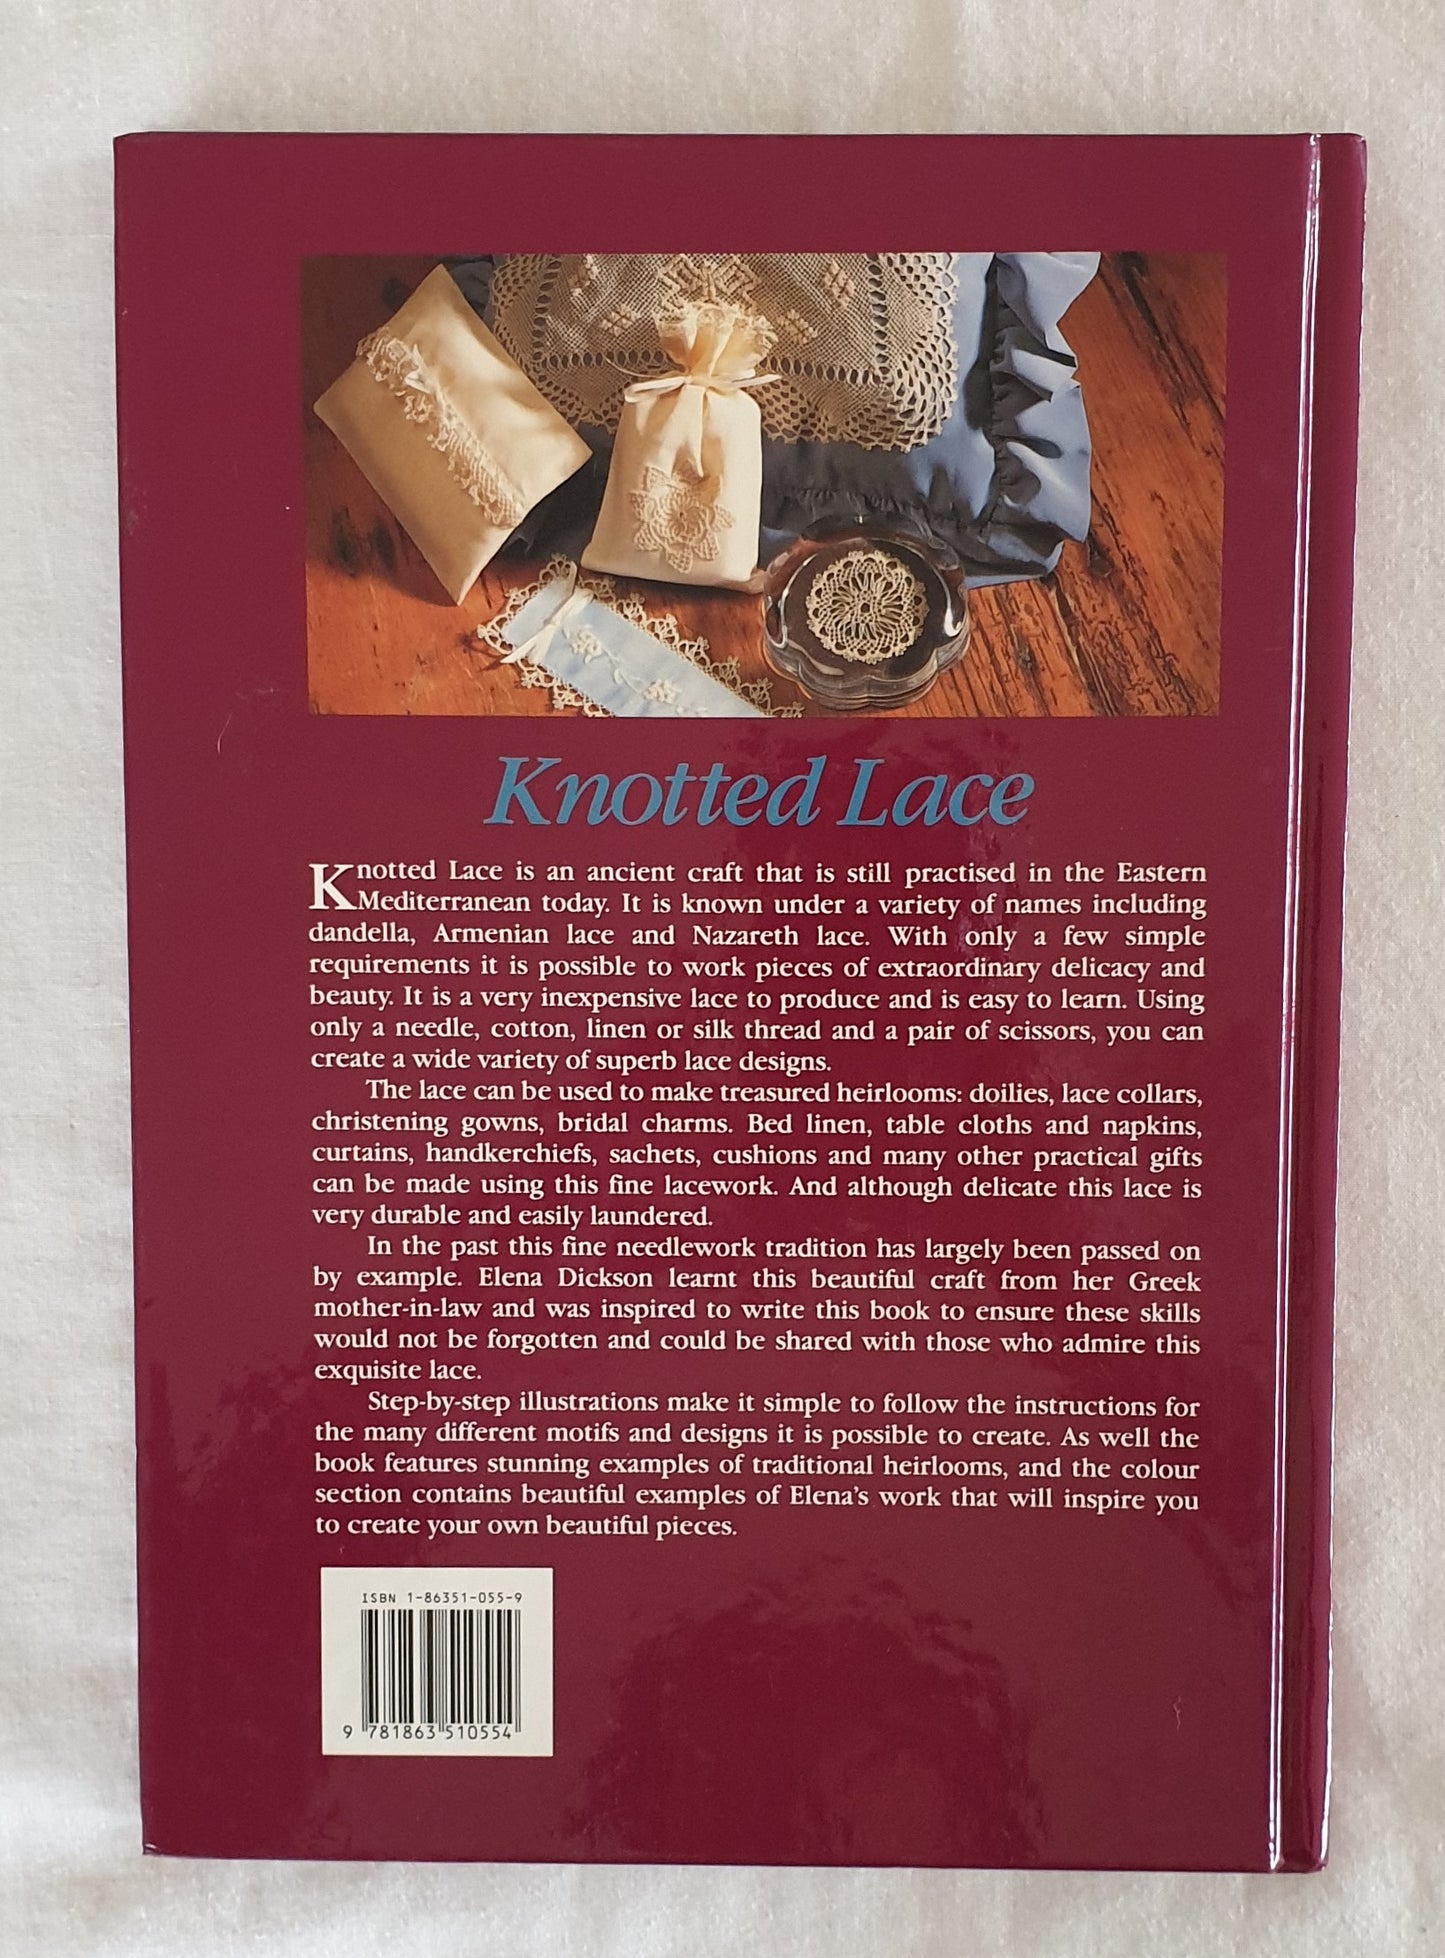 Knotted Lace by Elena Dickson